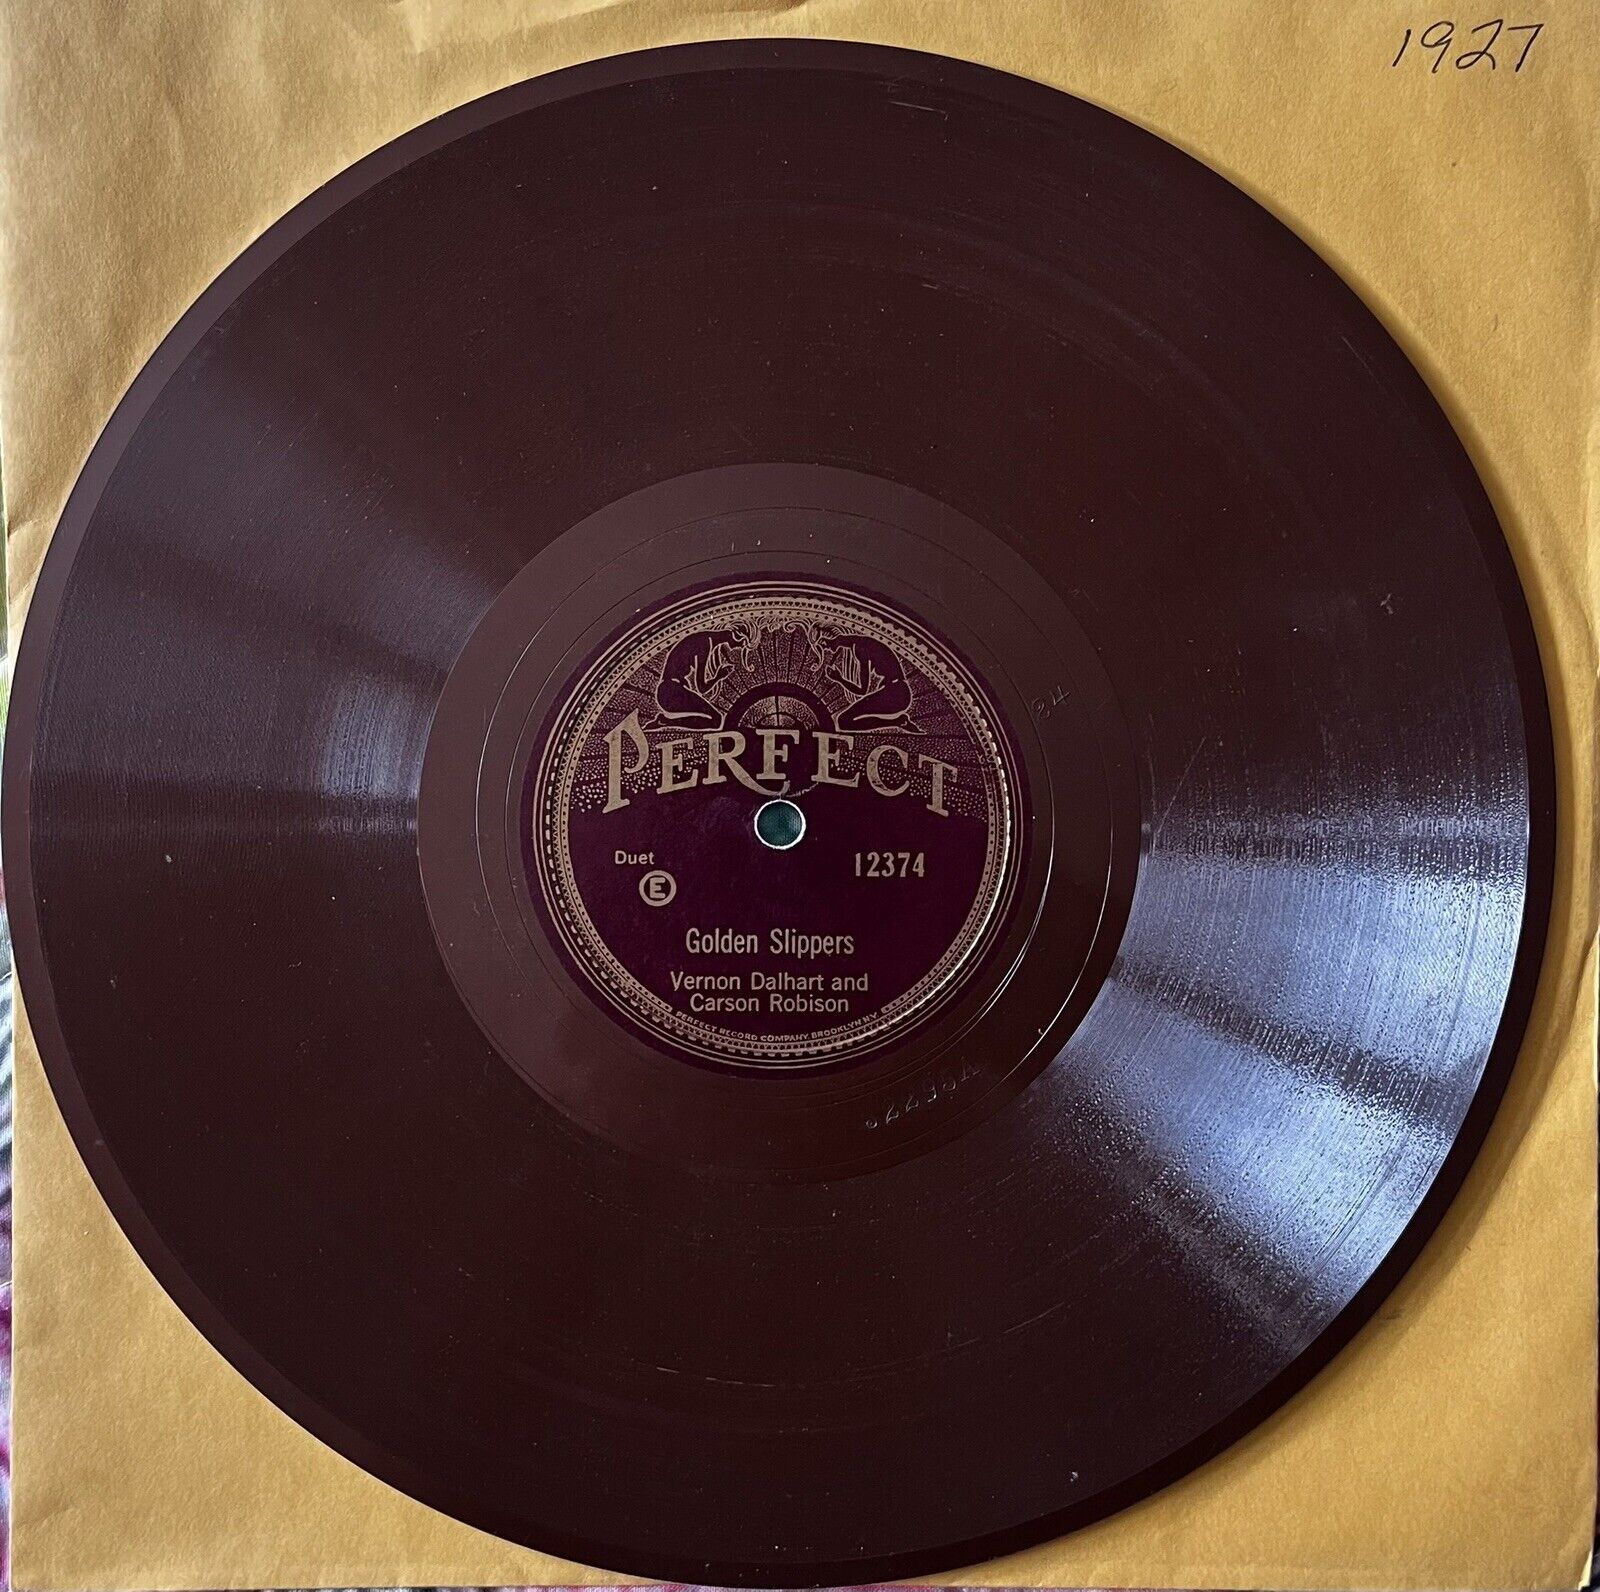 Vernon Dalhart-Golden Slippers-1927 Perfect 12374 78 rpm Beautiful Brown Disc